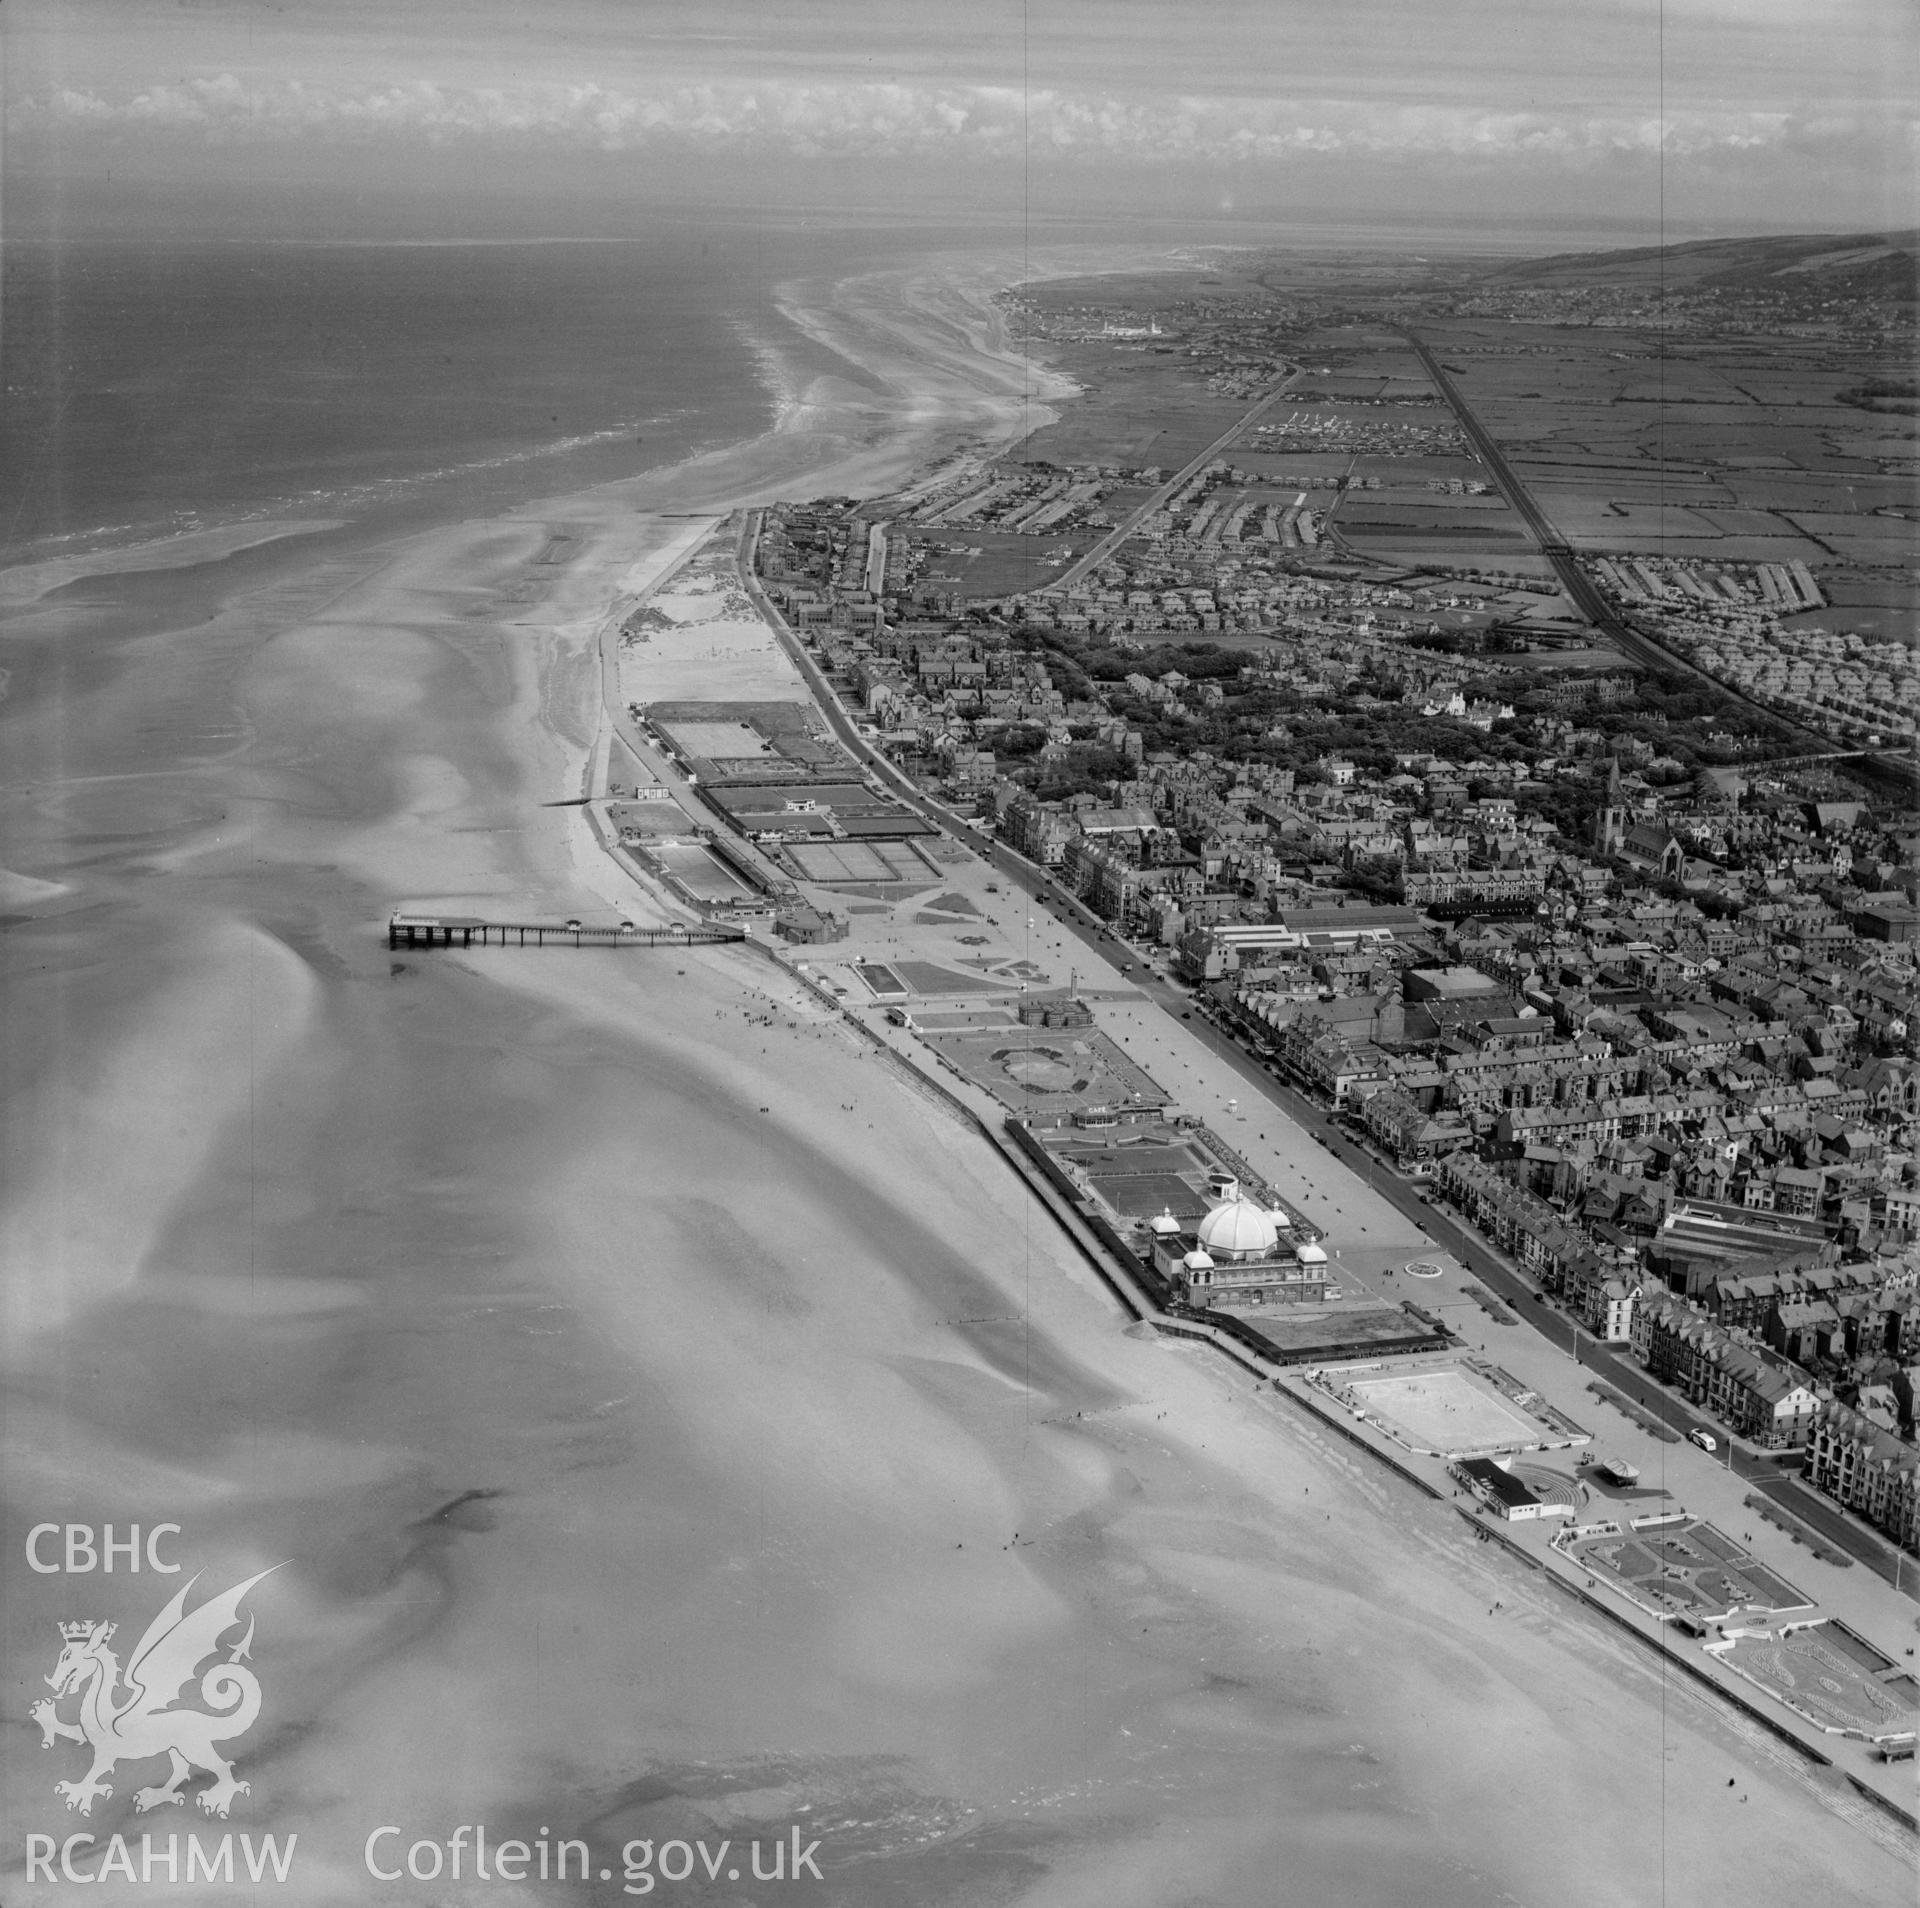 View of Rhyl showing pier